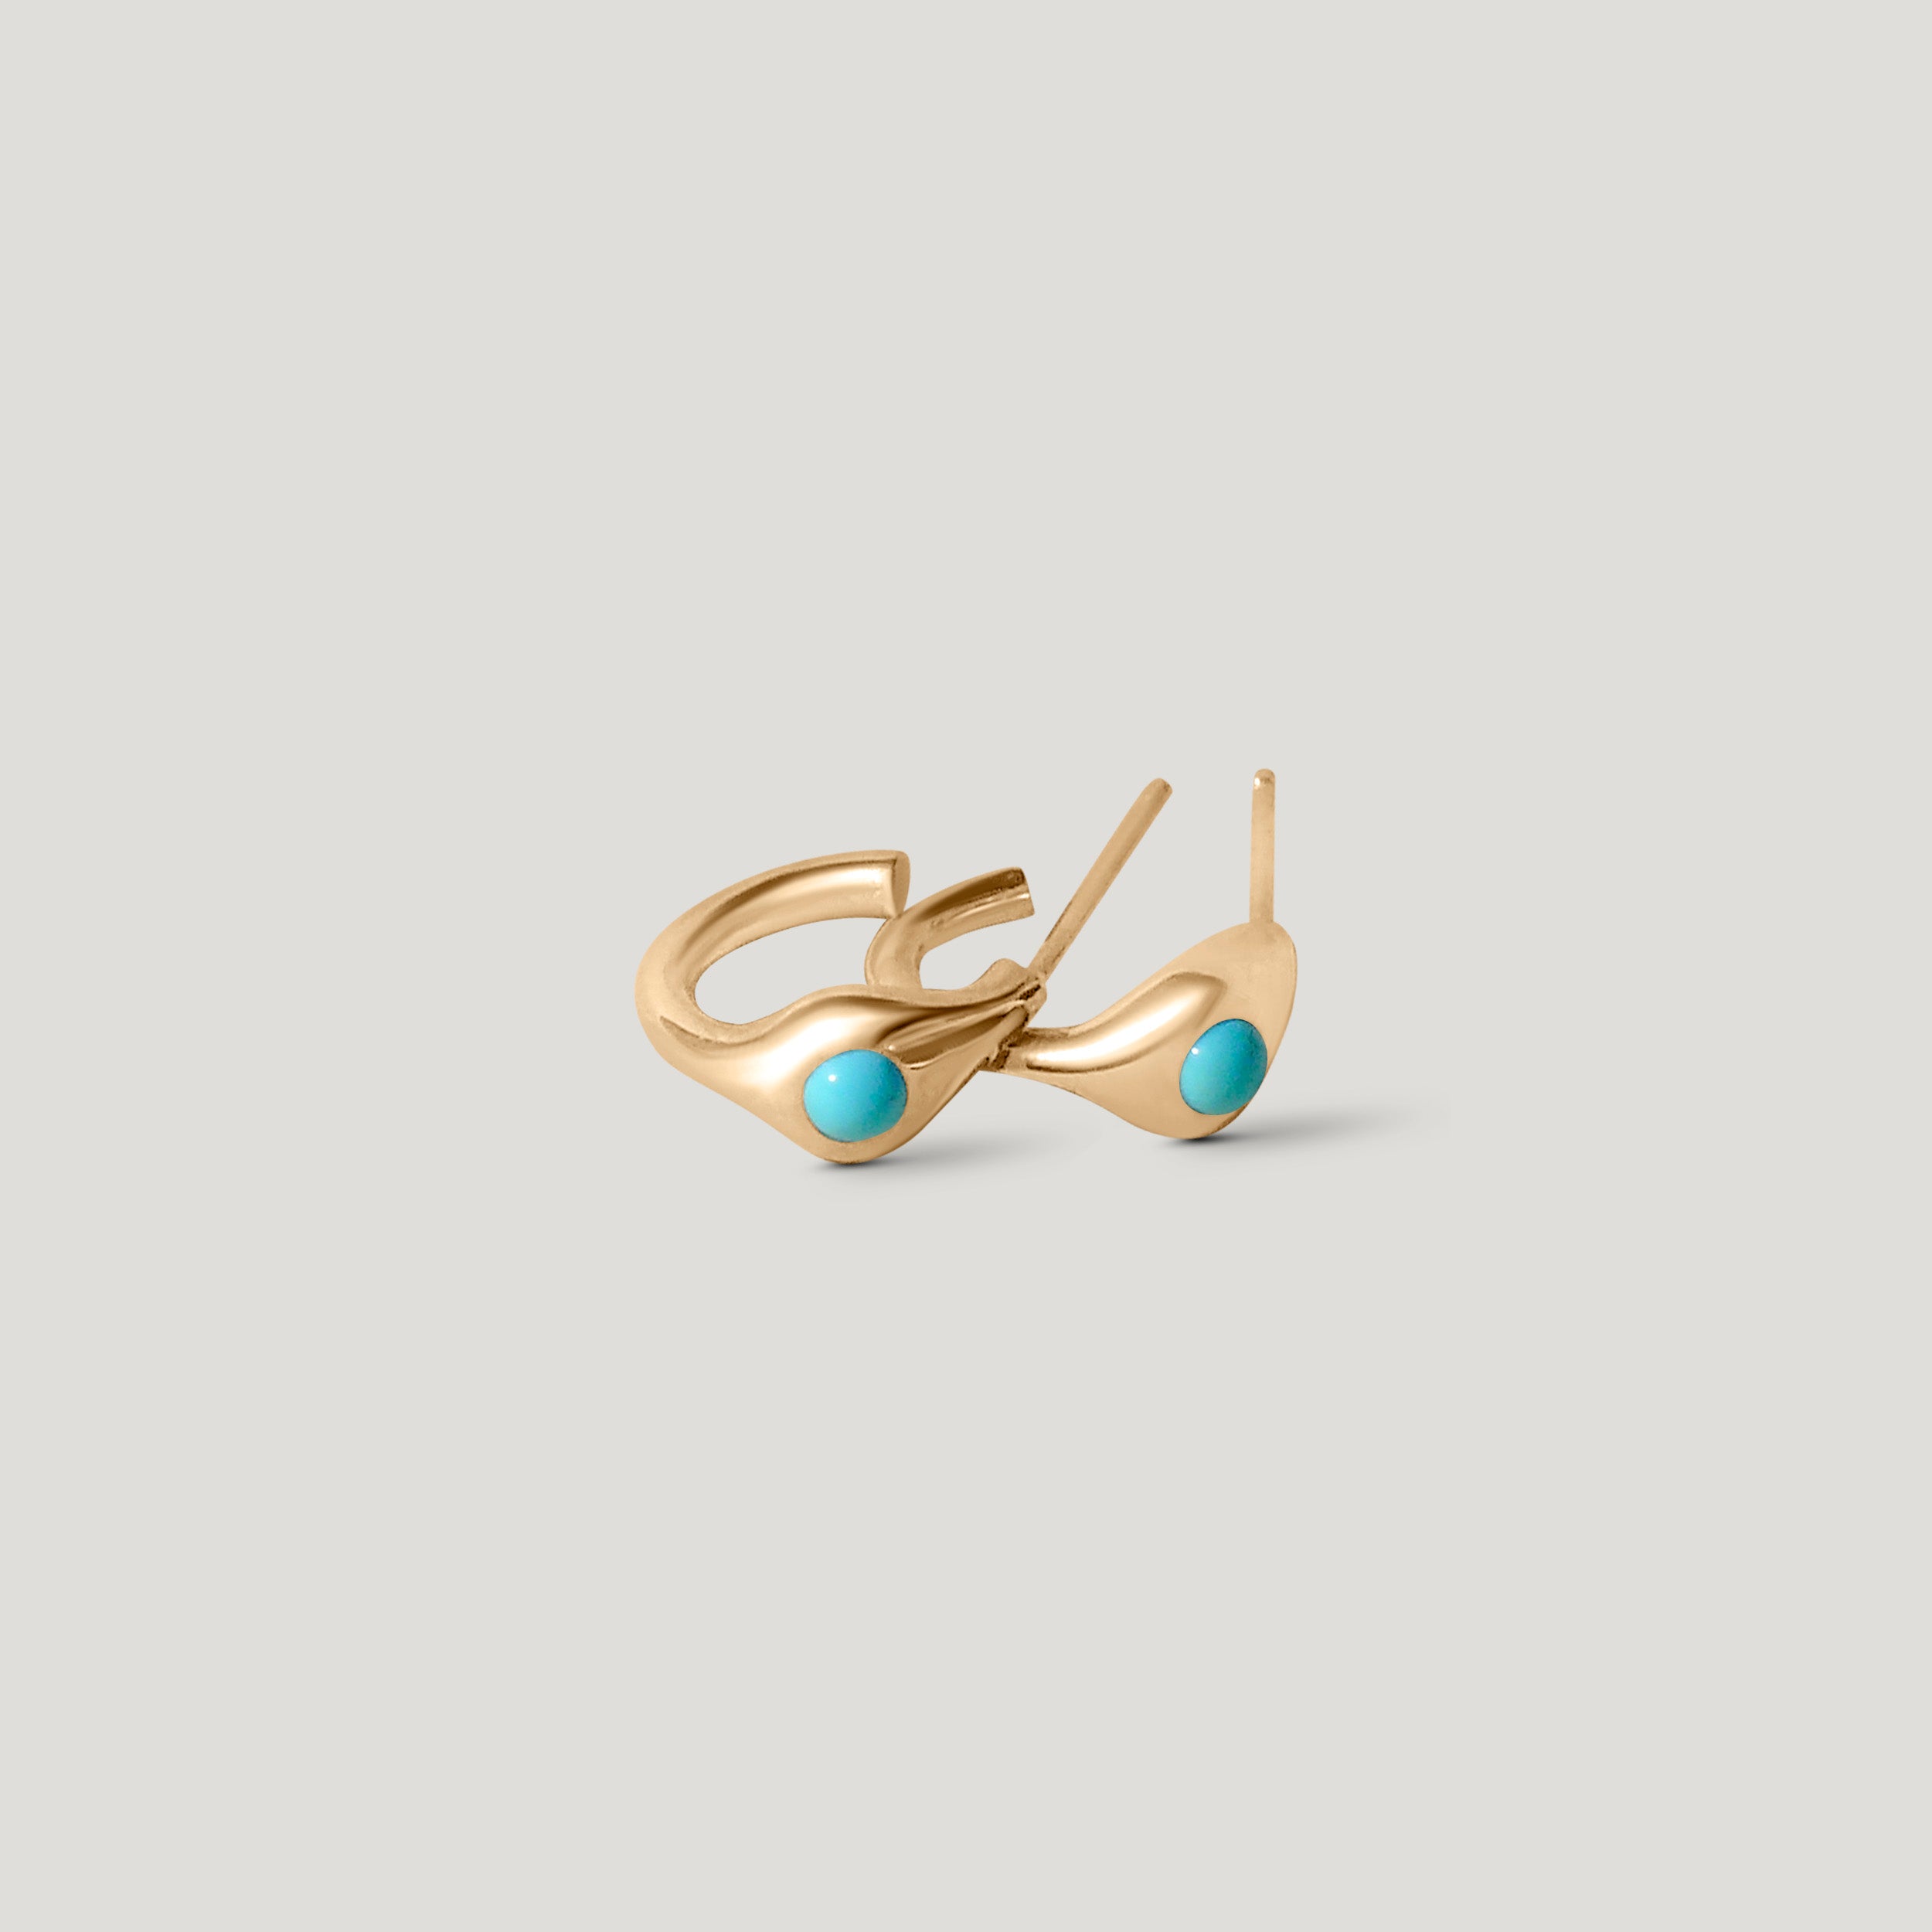 Gemstone Petite Signet Hoops - Gold and turquoise